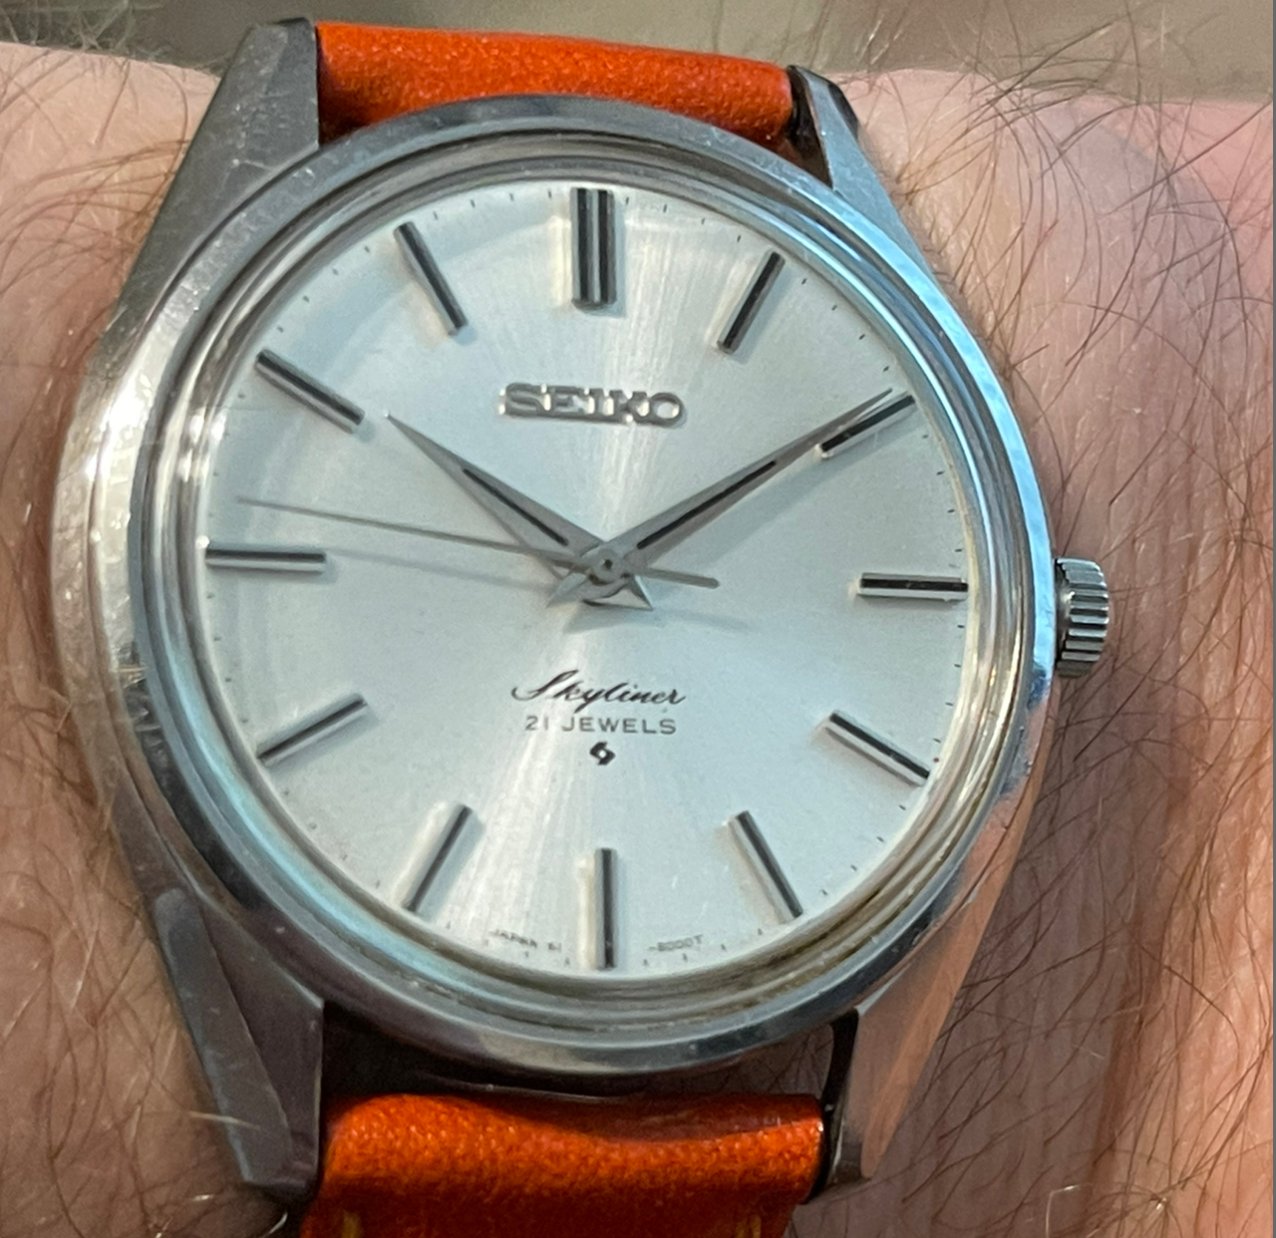 Thoughts on this Skyliner | Omega Forums